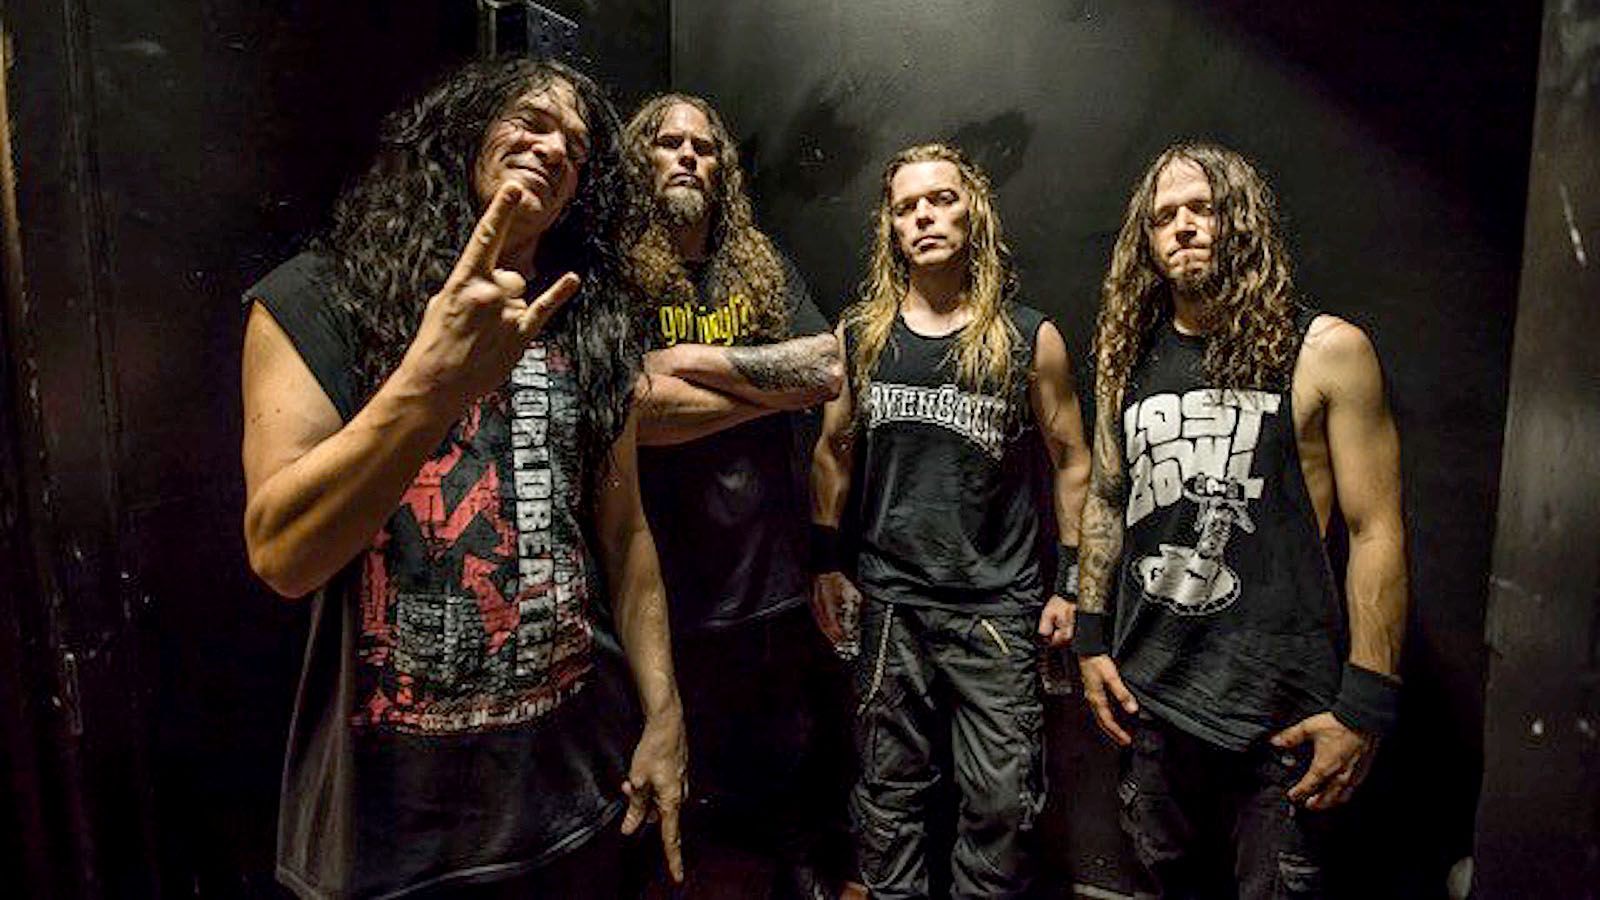 Death metal act Morbid Angel will take the main stage at Piere’s on Tuesday, April 4.